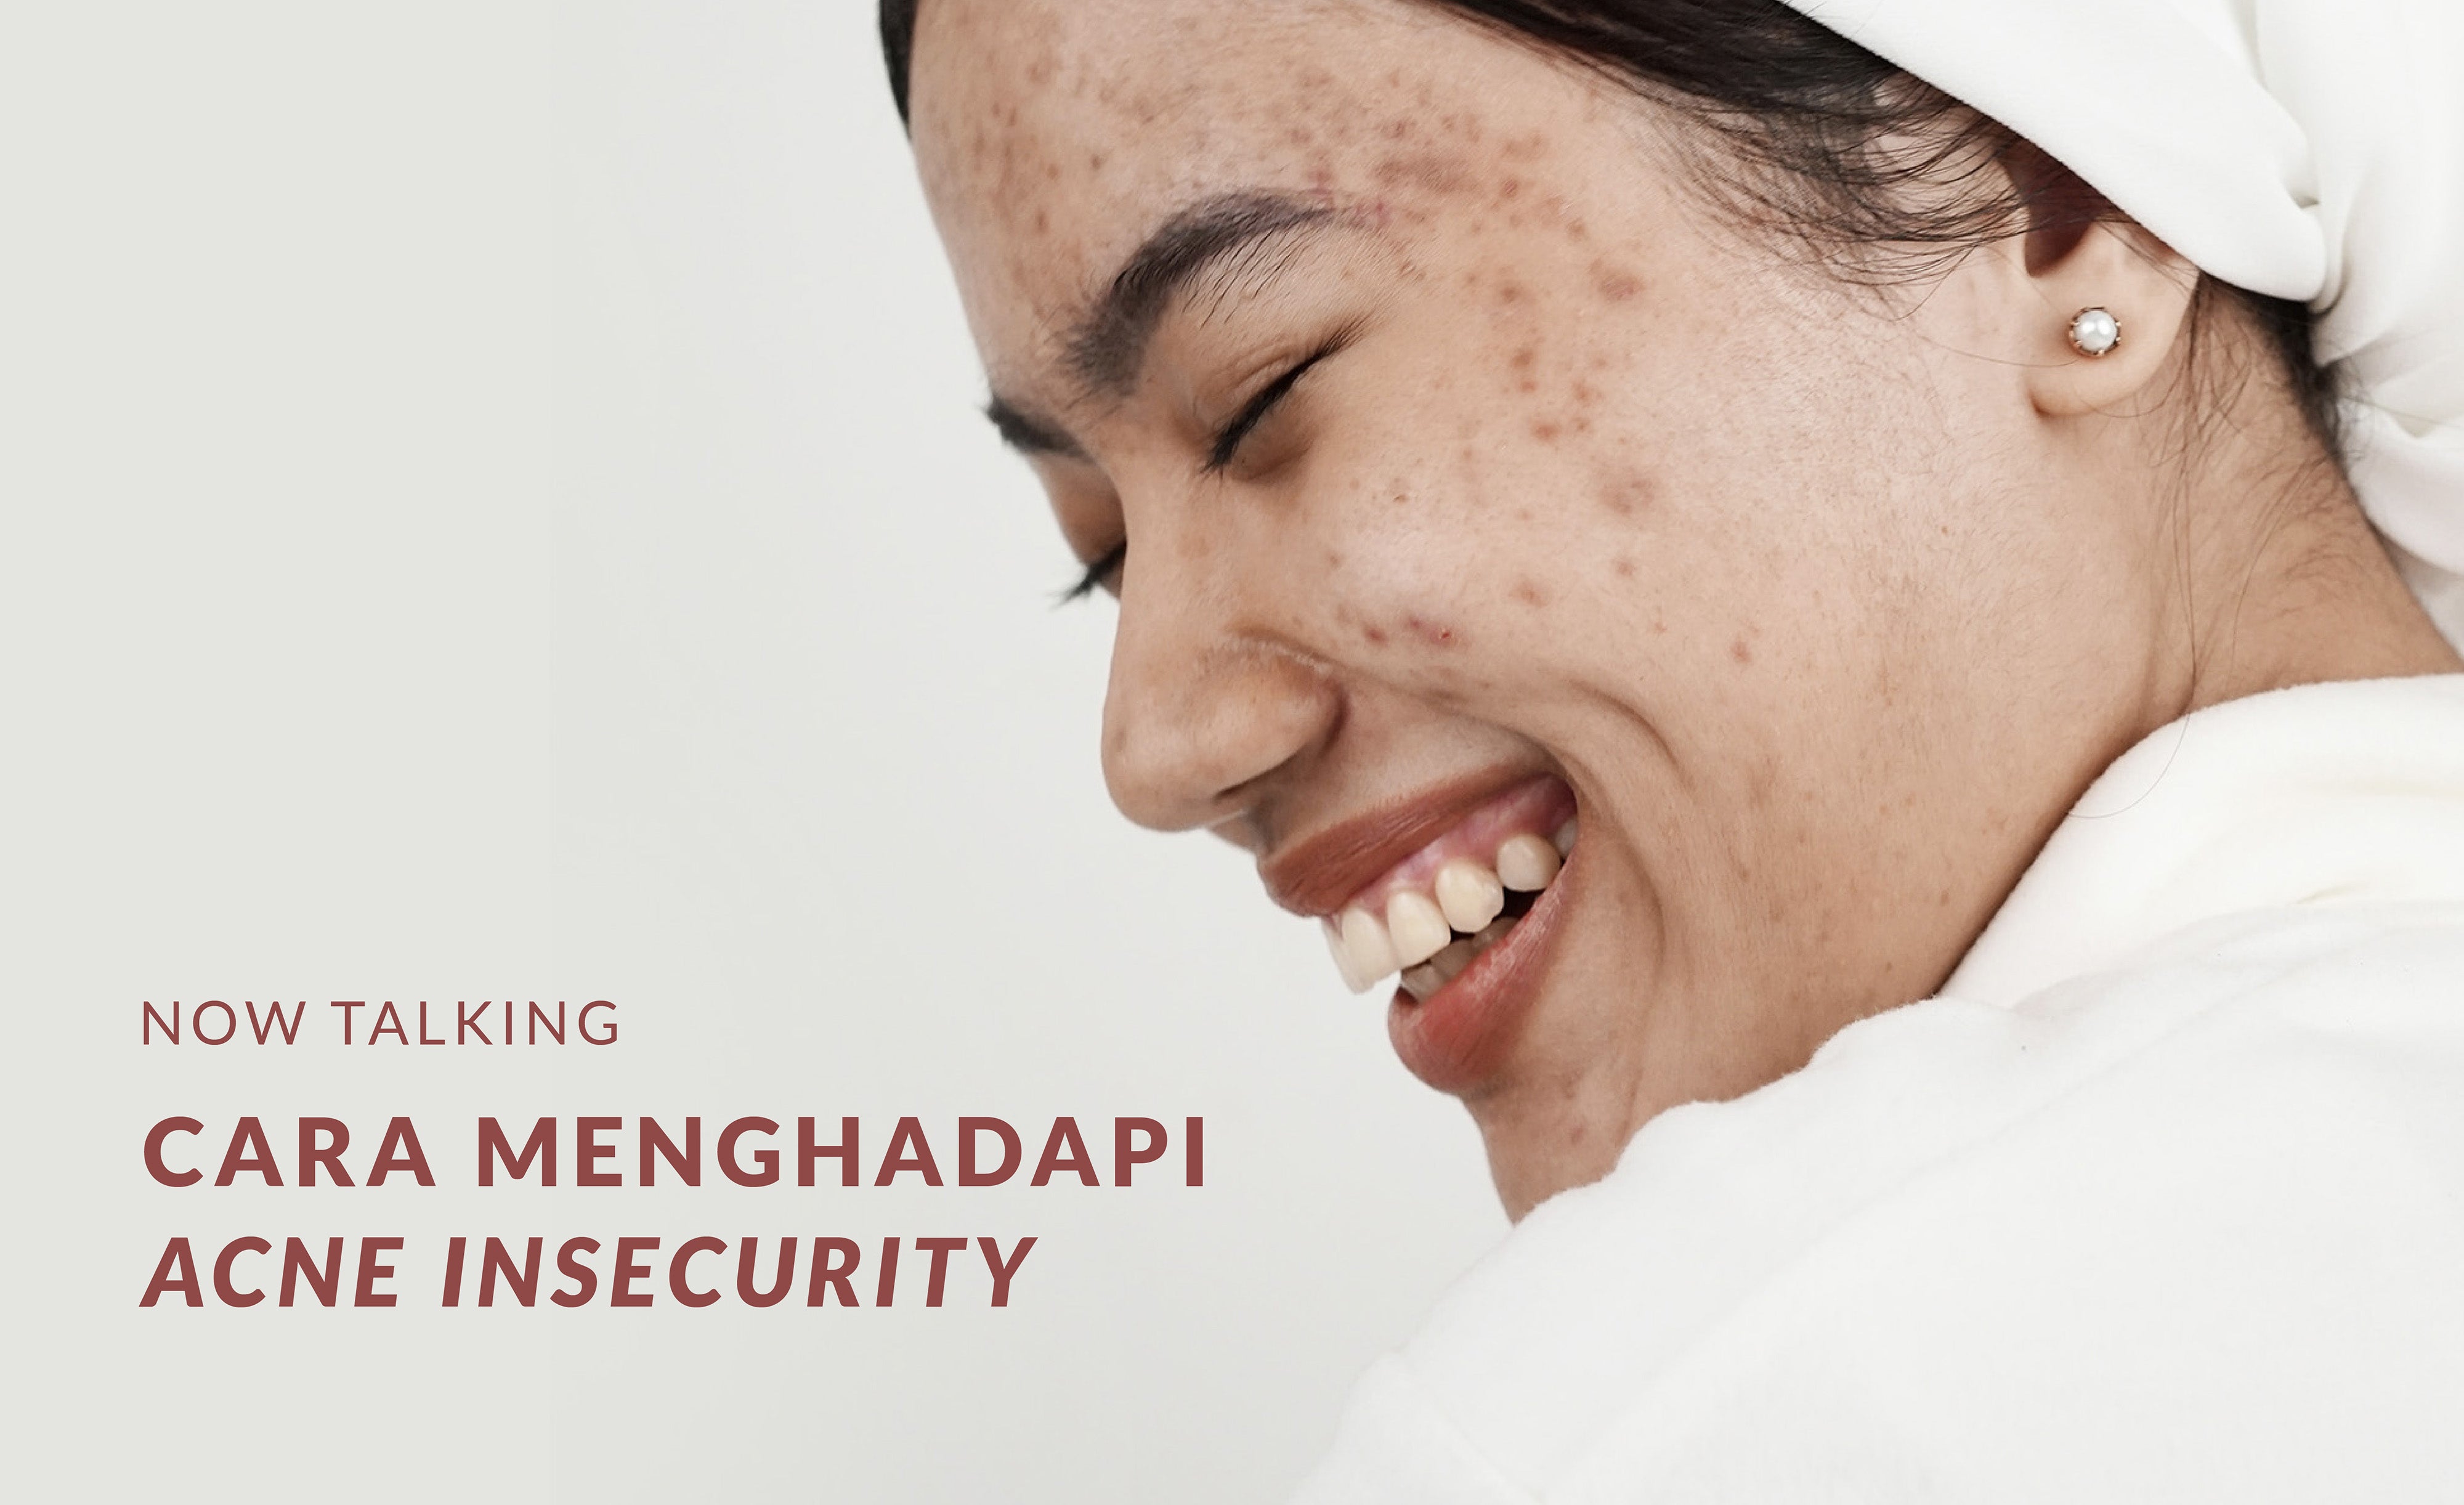 NOW TALKING | CARA MENGHADAPI ACNE INSECURITY